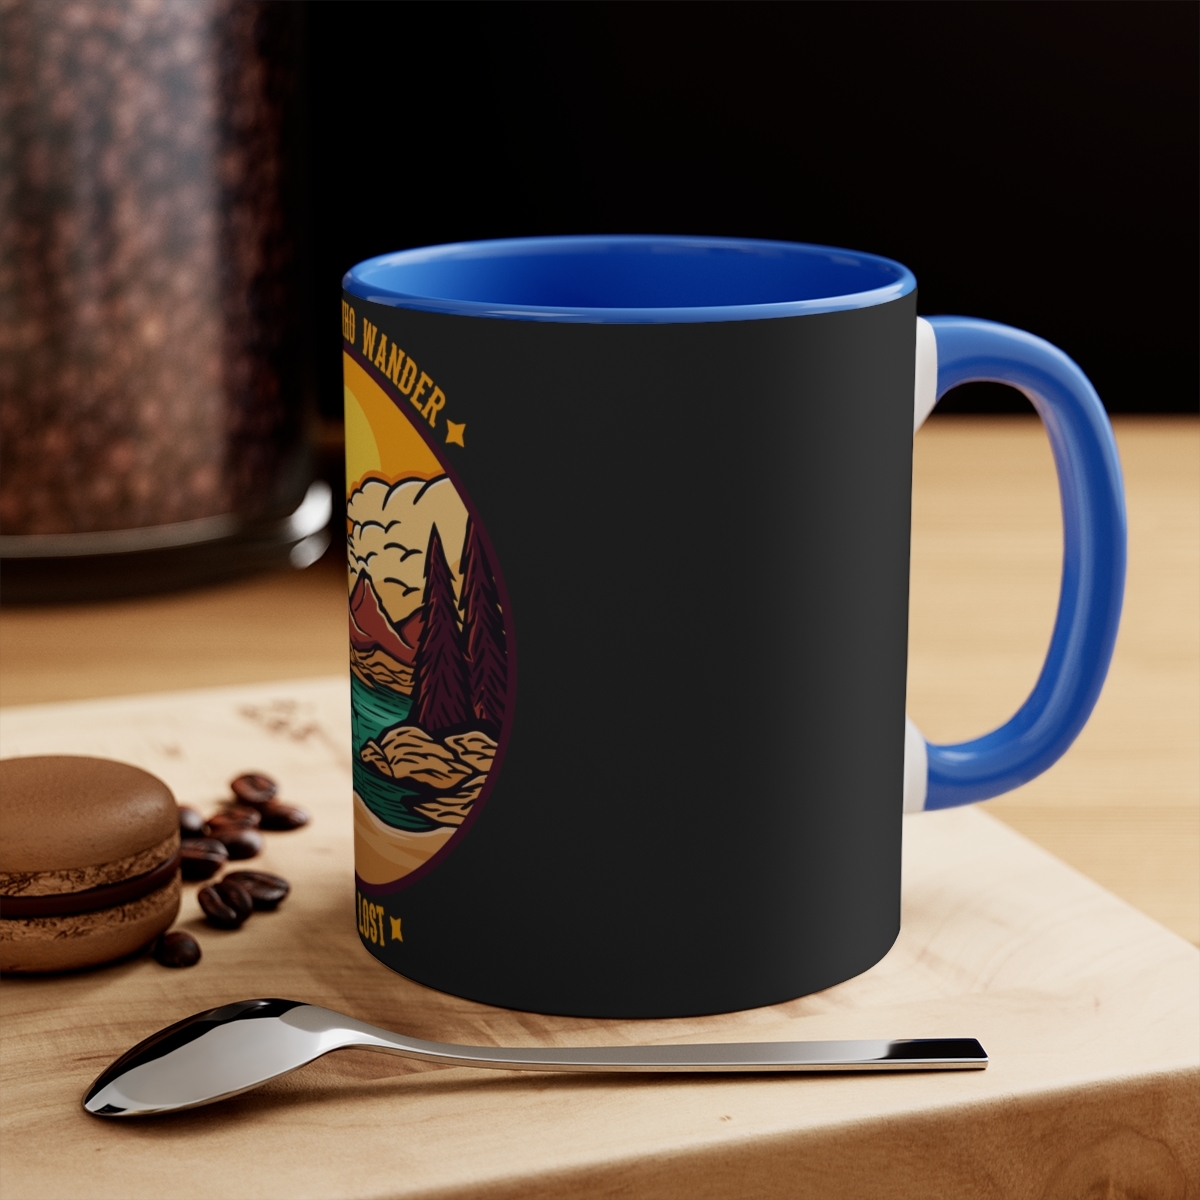 Primary image for 11oz Wanderlust Mug: Not All Who Wander are Lost - Cartoon Quote Travel Wanderer